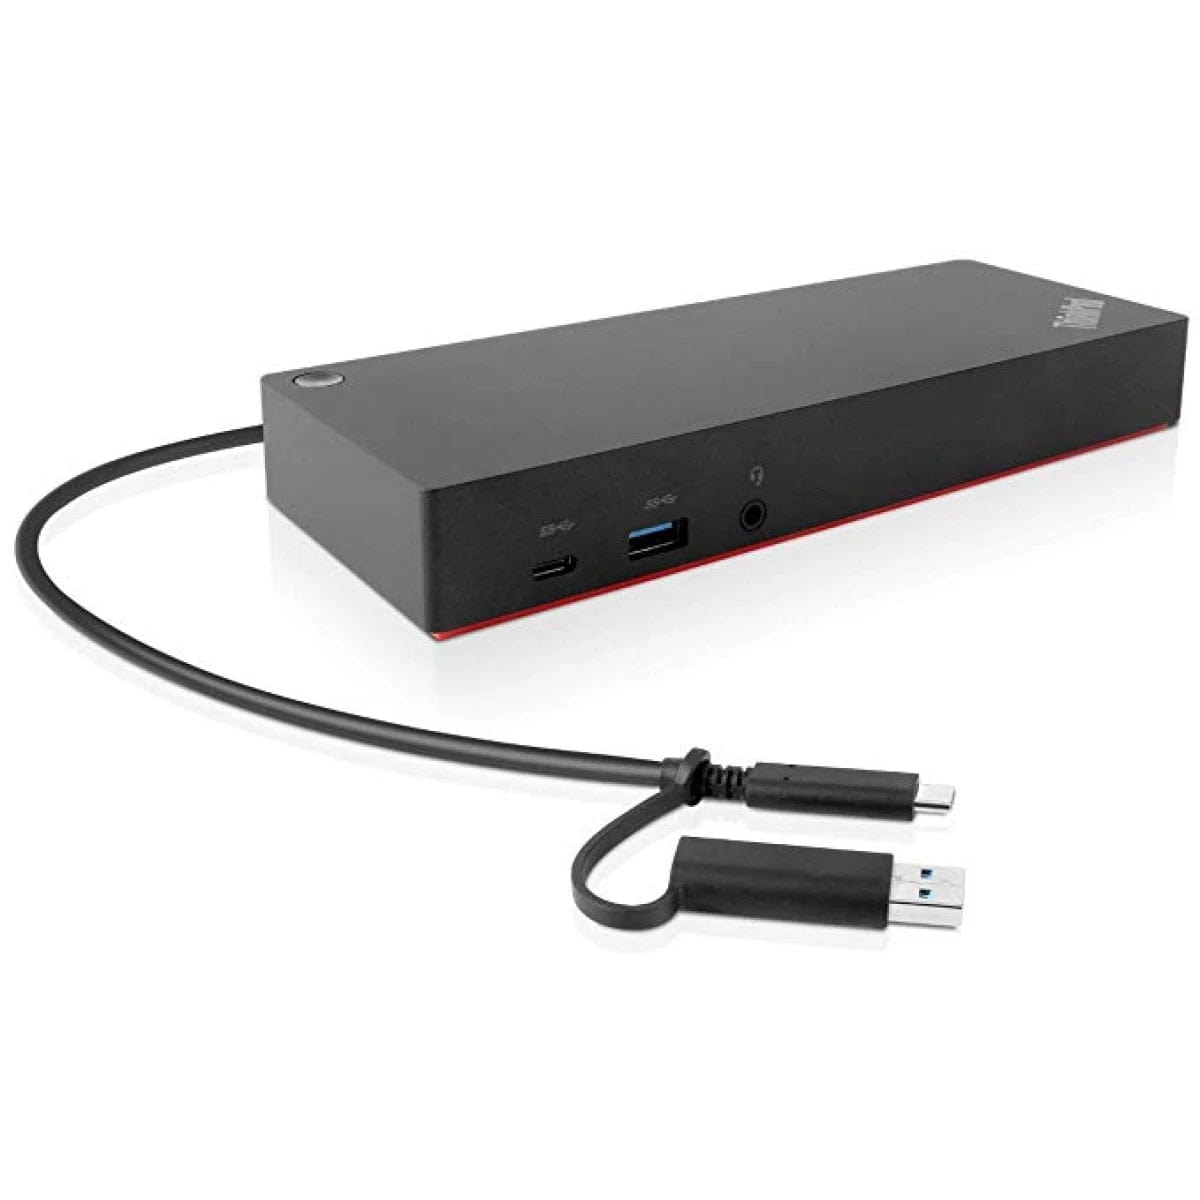 LENOVO CABLES ThinkPad Hybrid USB-C with USB-A Dock 90w Adapter 40AF0135UK